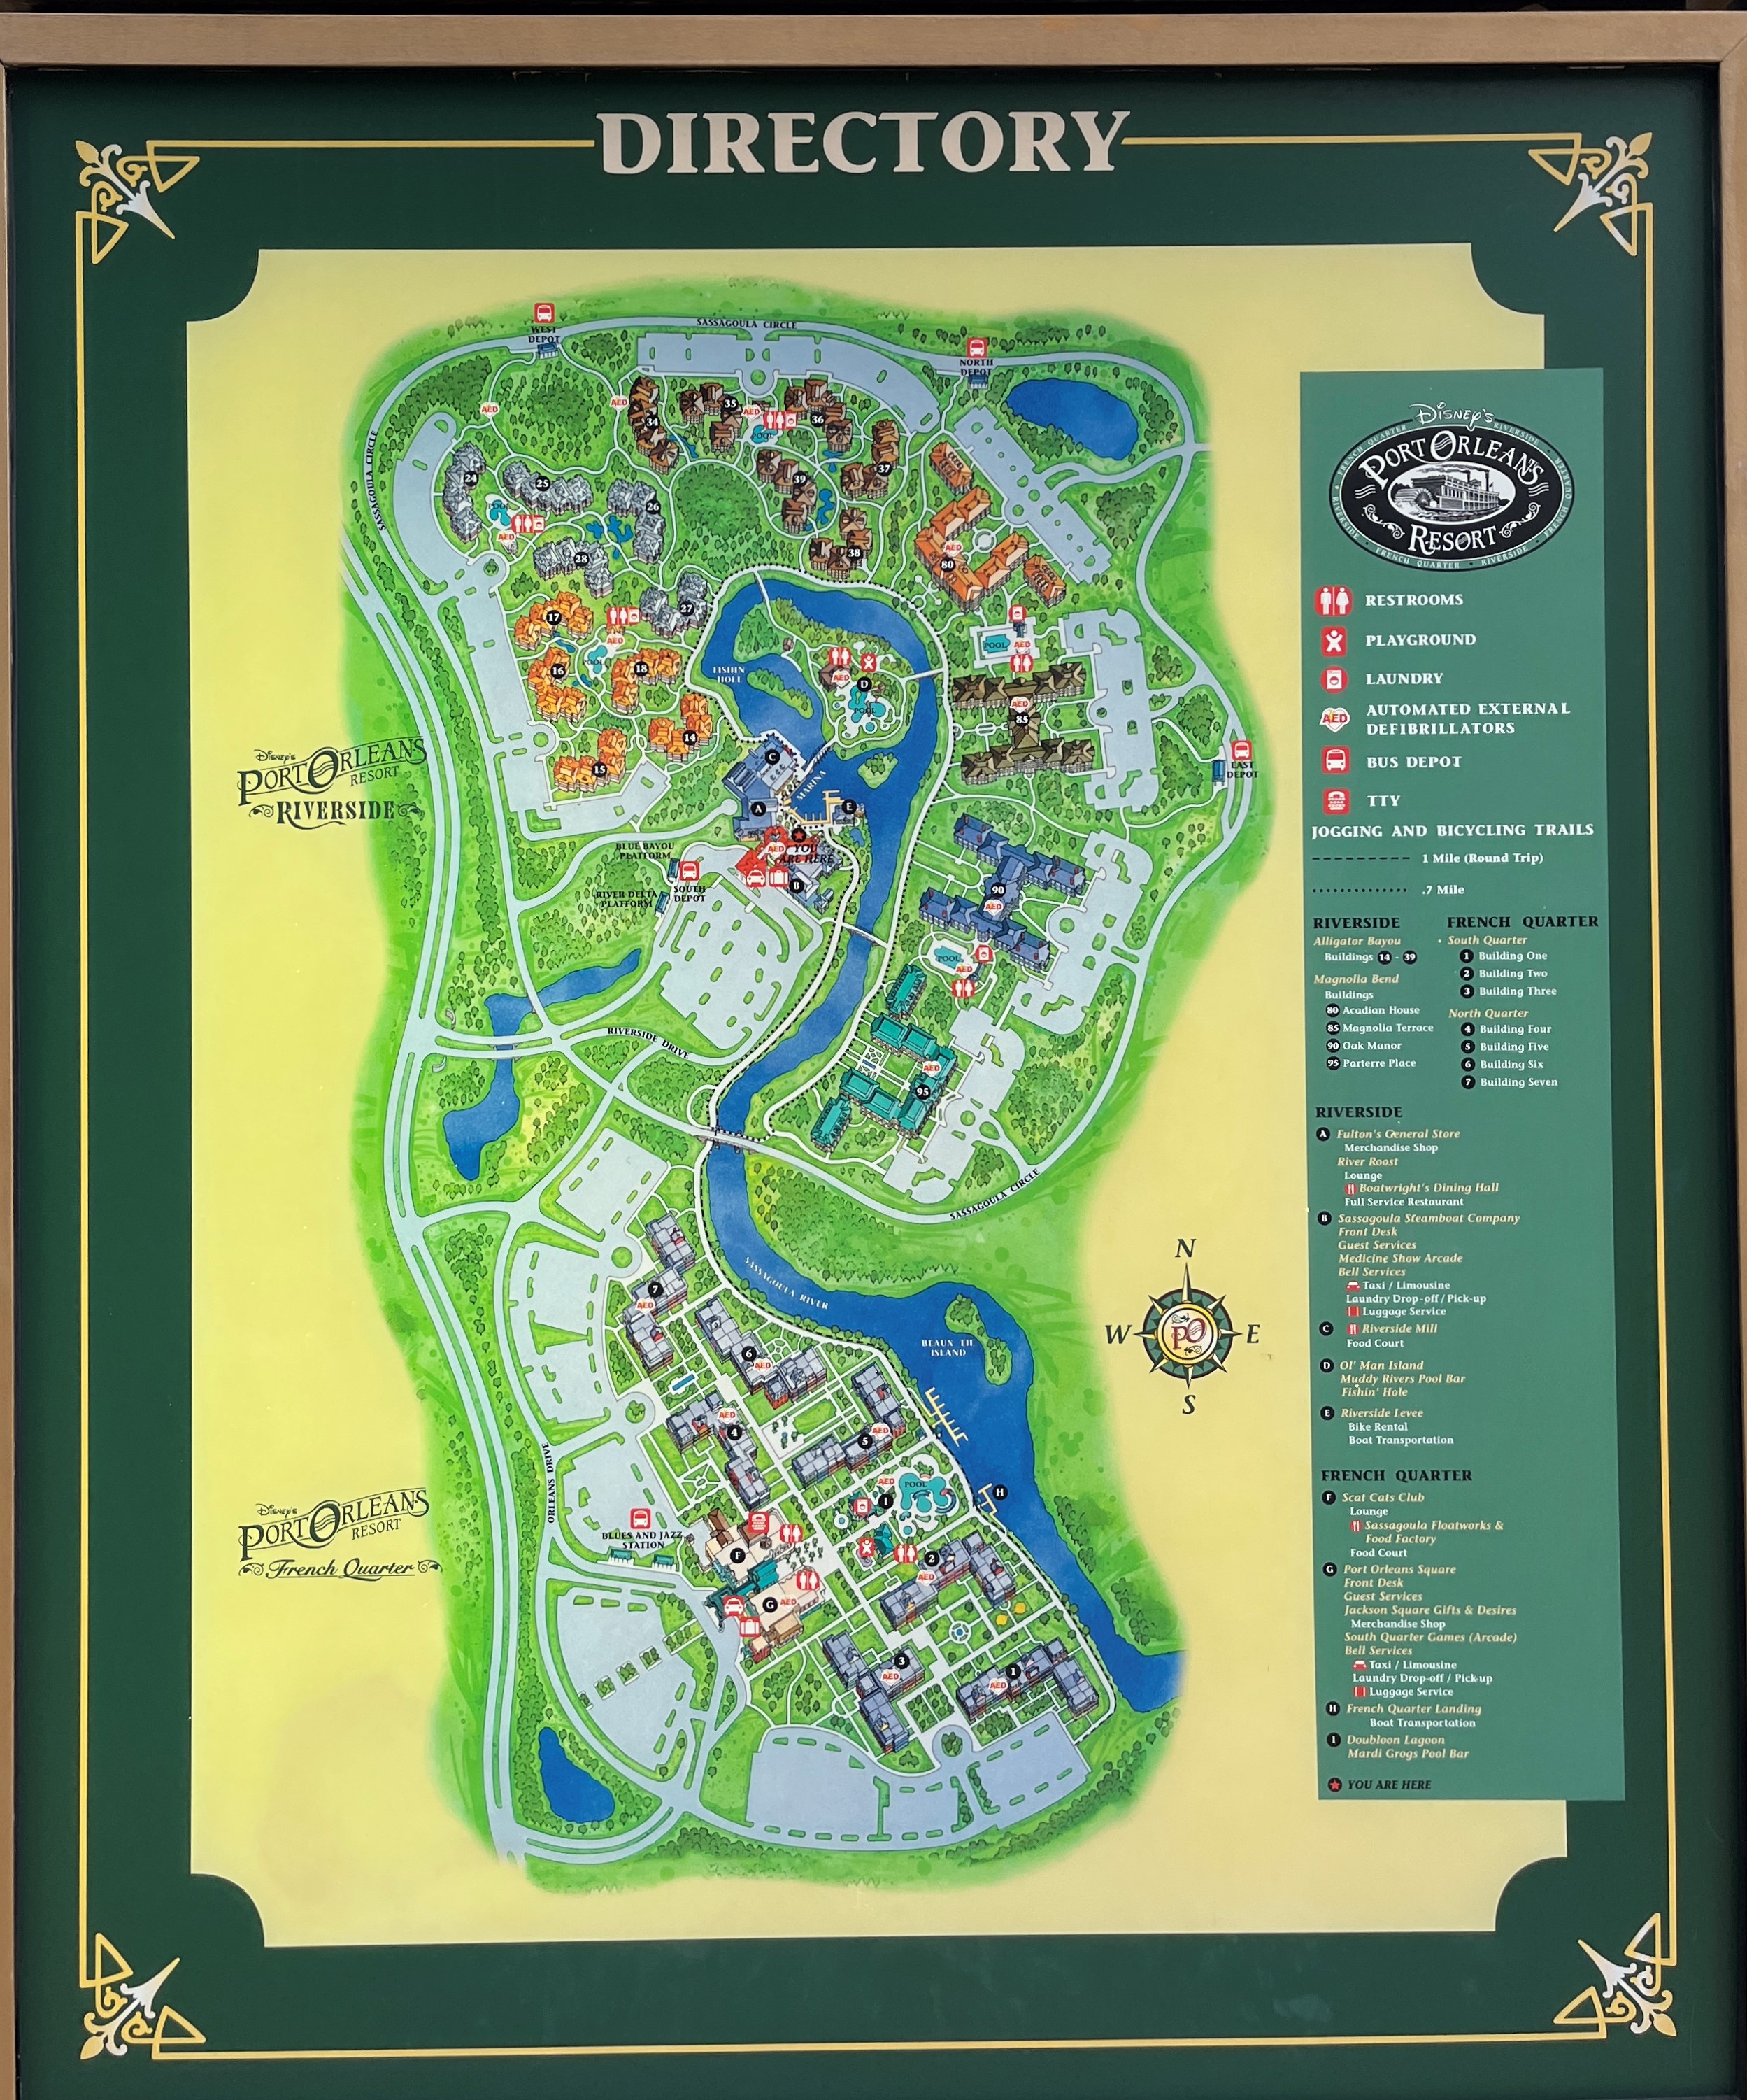 the map and directory of Disney's Port Orleans Resort, including Port Orleans Riverside and French Quarter